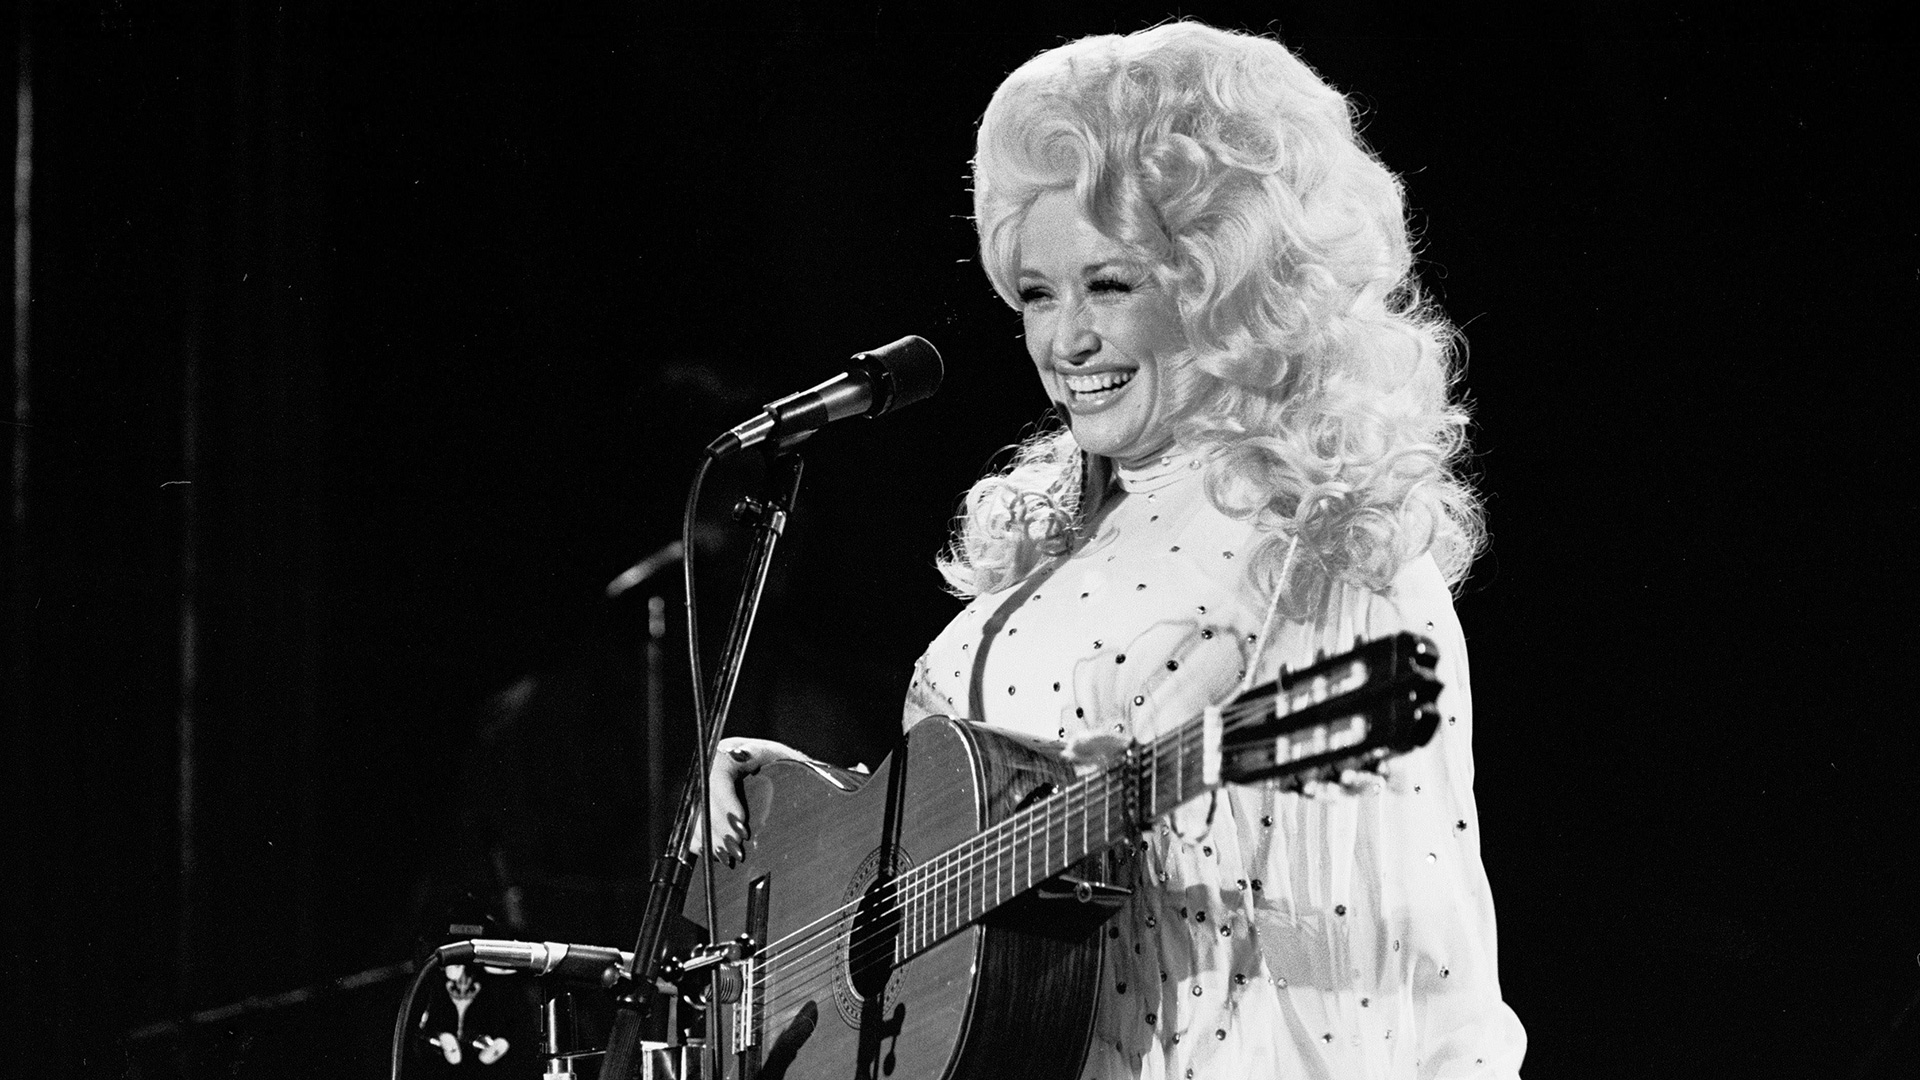 October 9, 1978: Dolly Parton Won Entertainer of the Year at the 12th Annual Country Music Awards